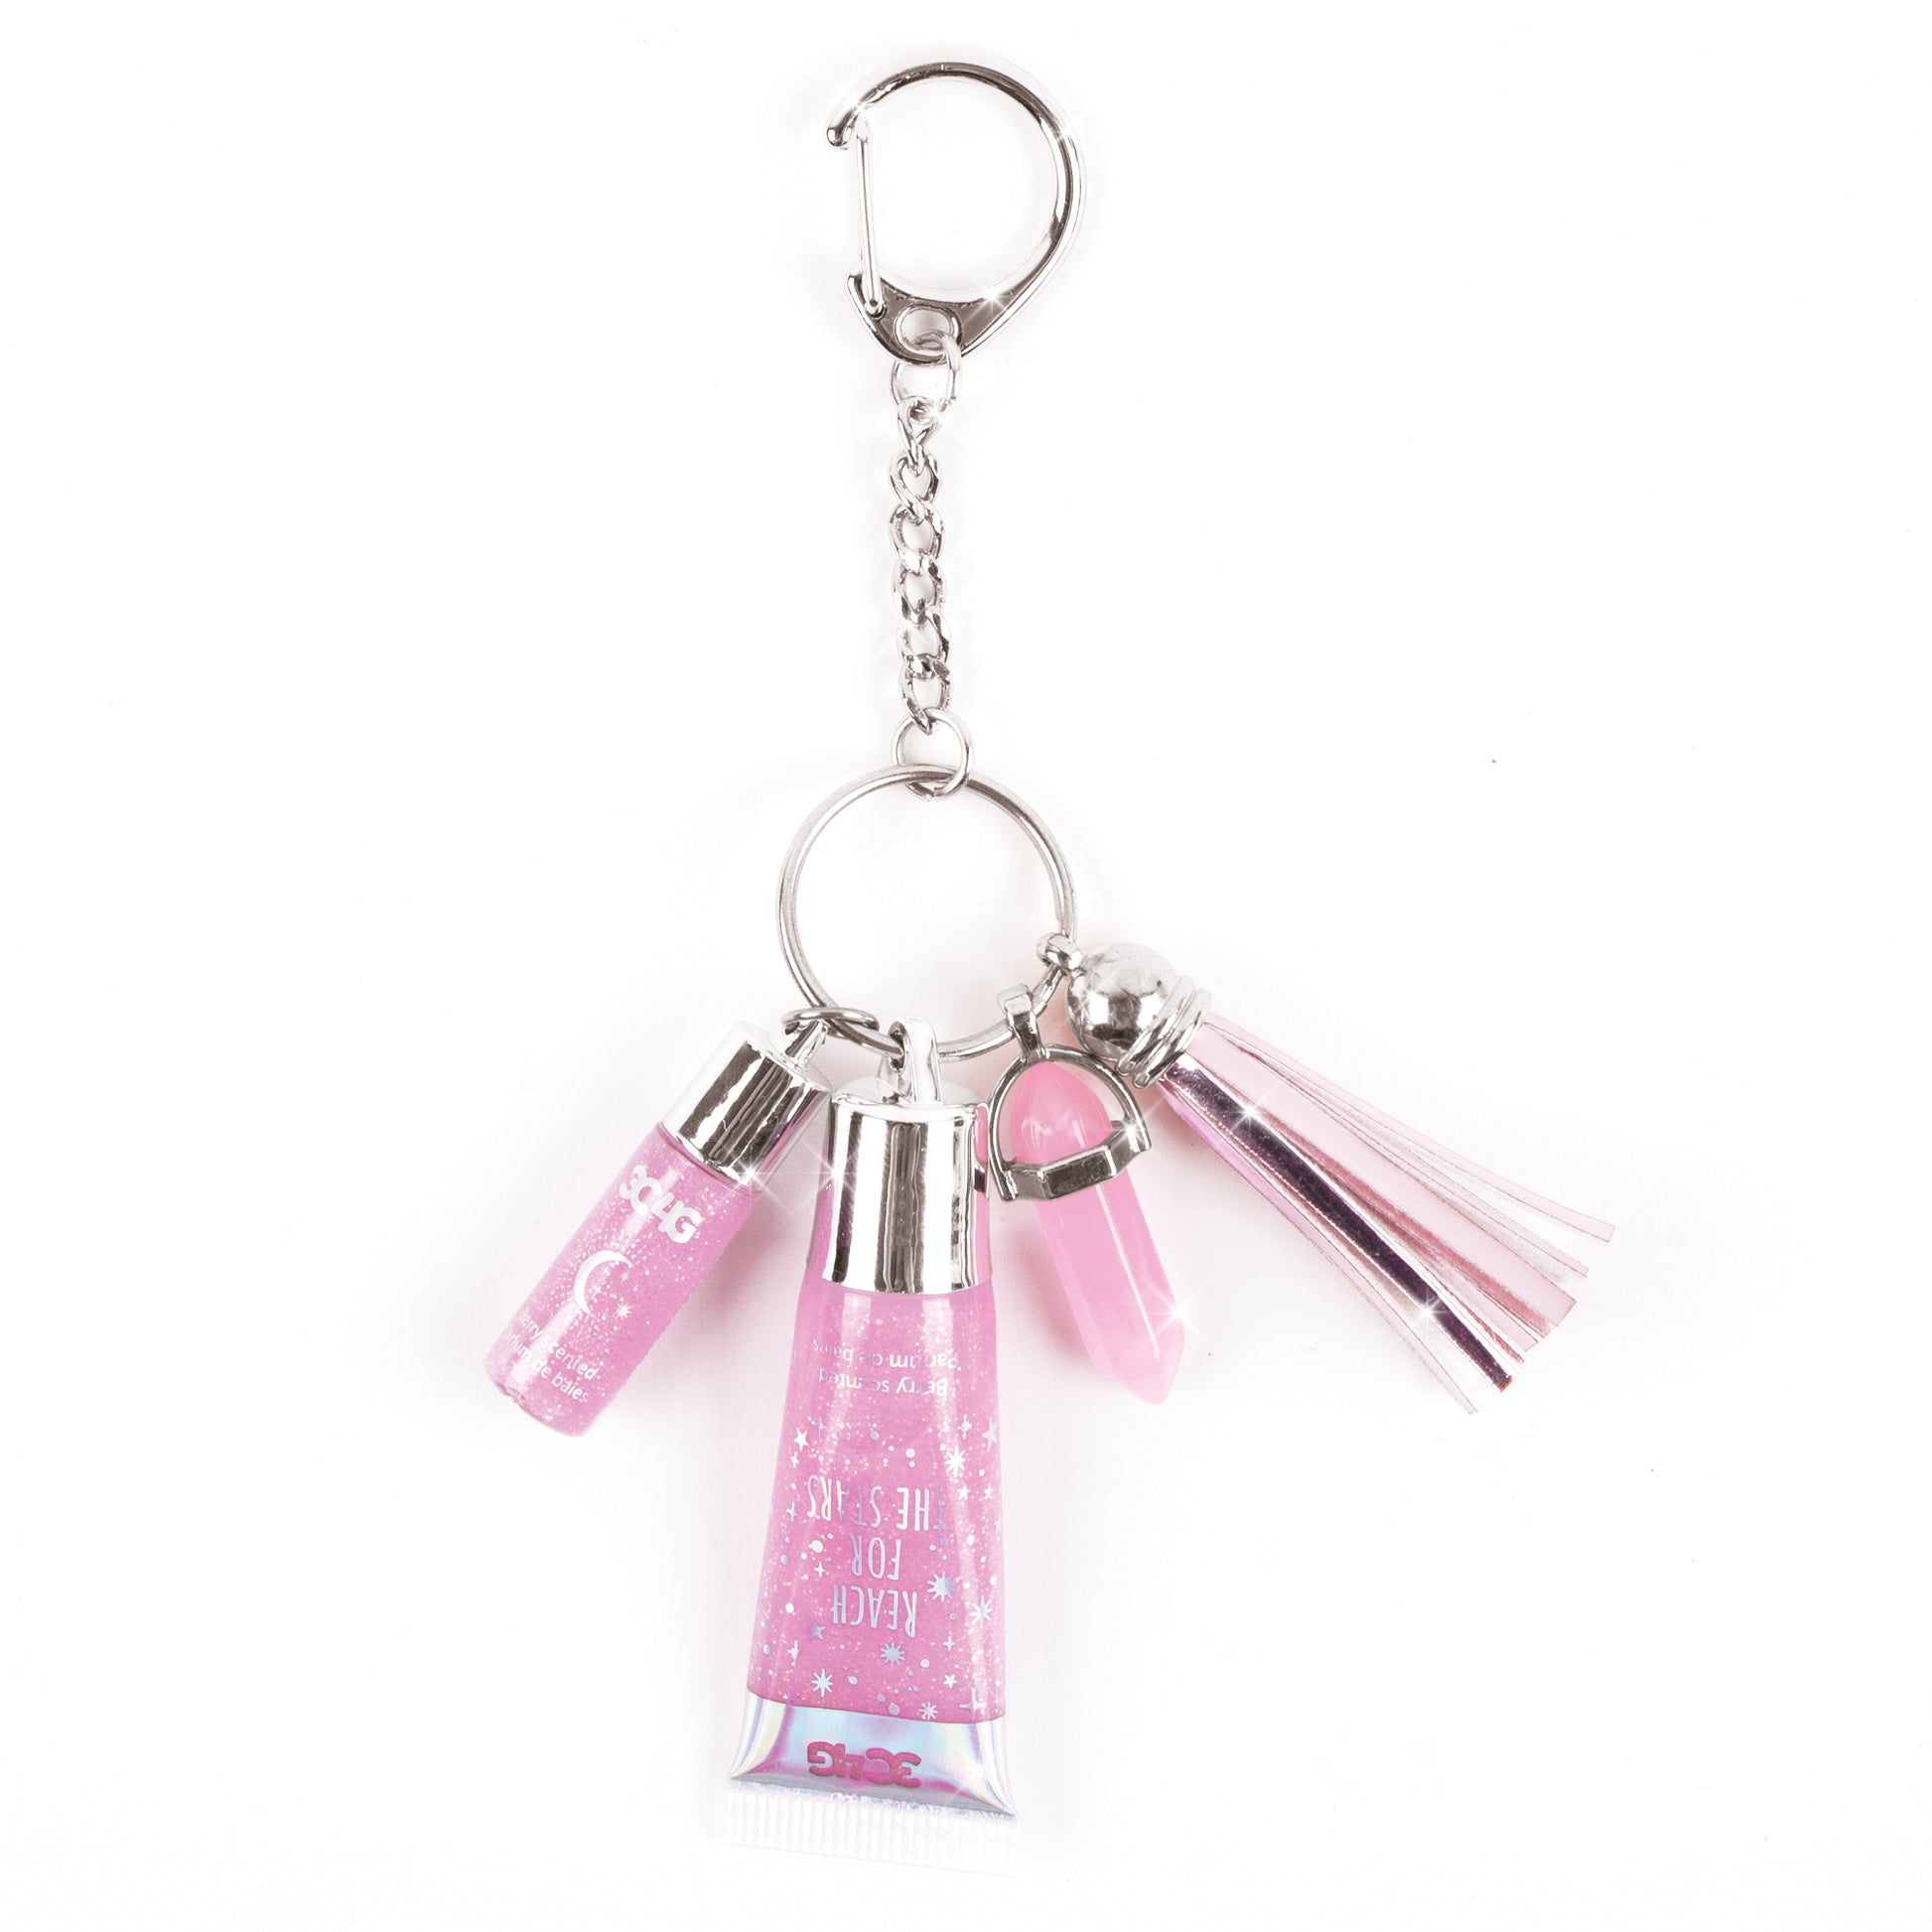 Makeup, Letter Key Ring With Clear Lip Gloss